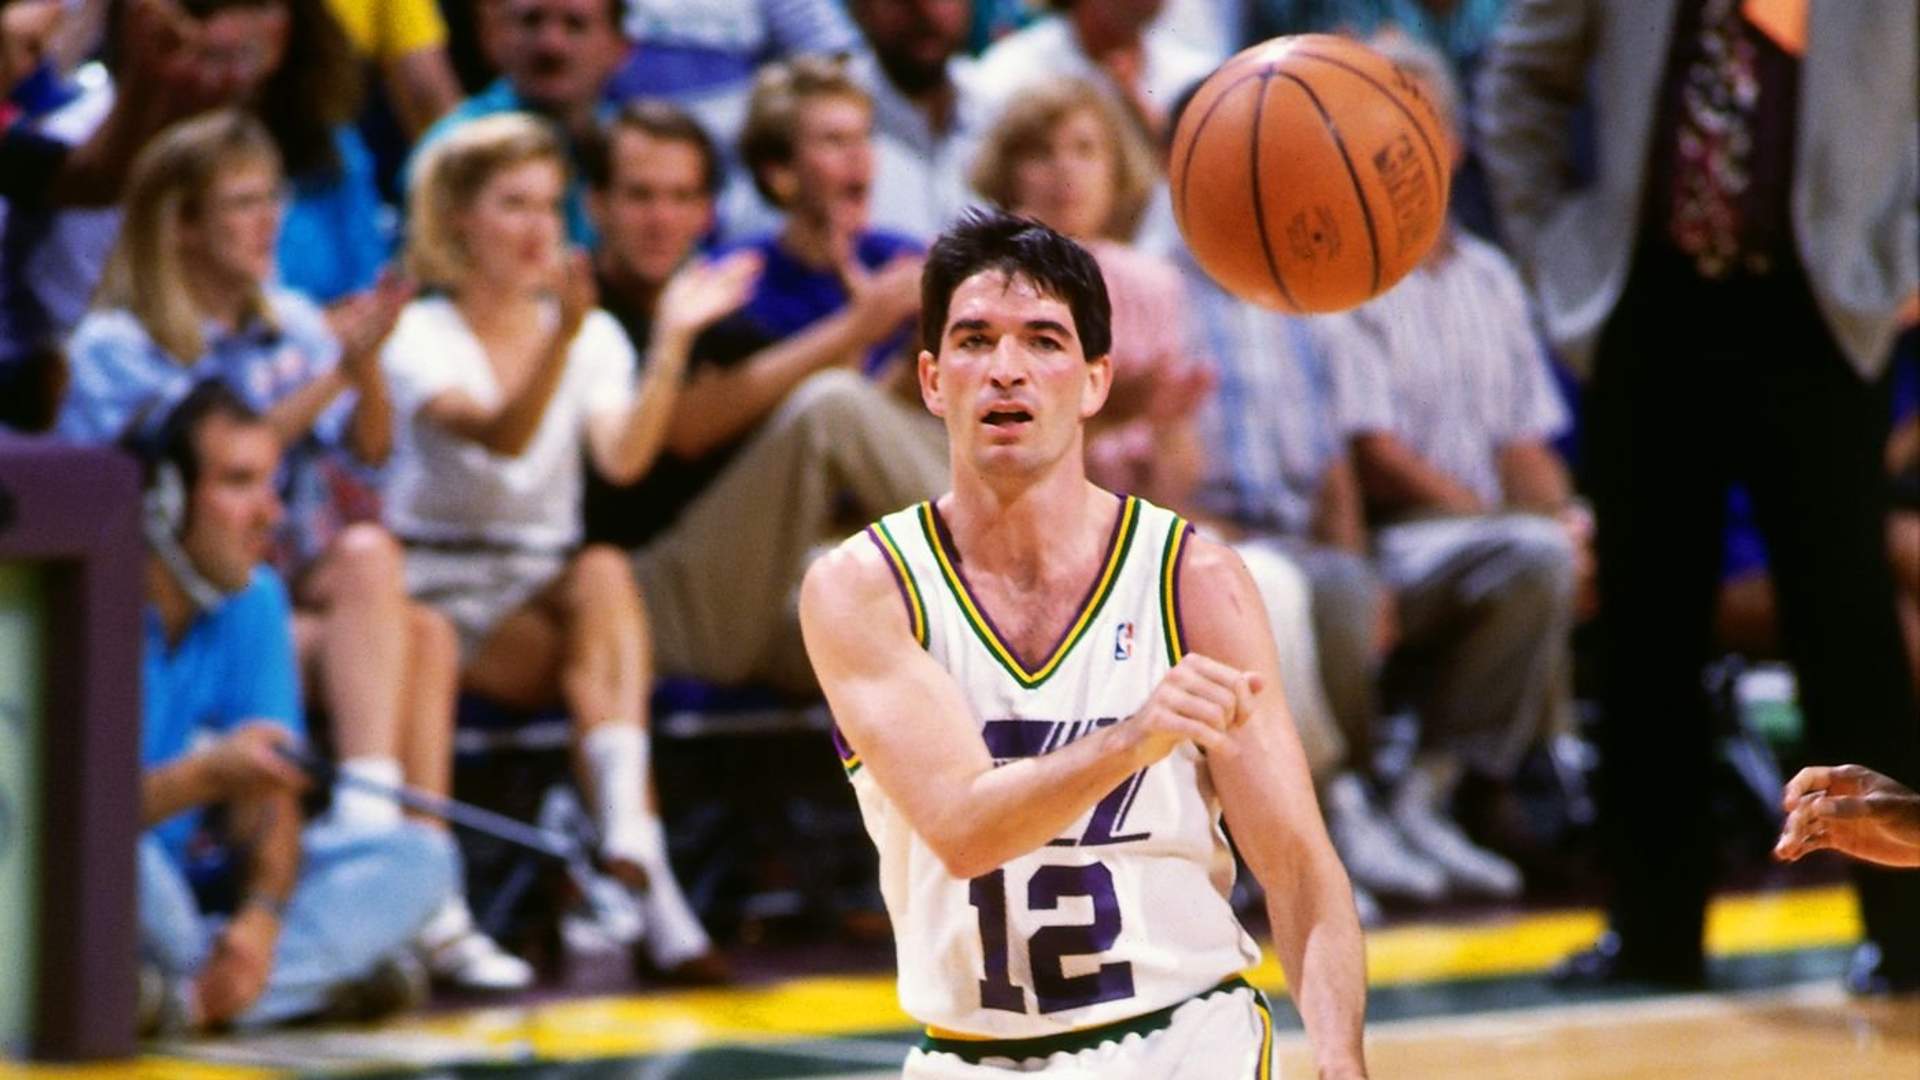 John Stockton has the most assists in the NBA. (Image credits: twitter)